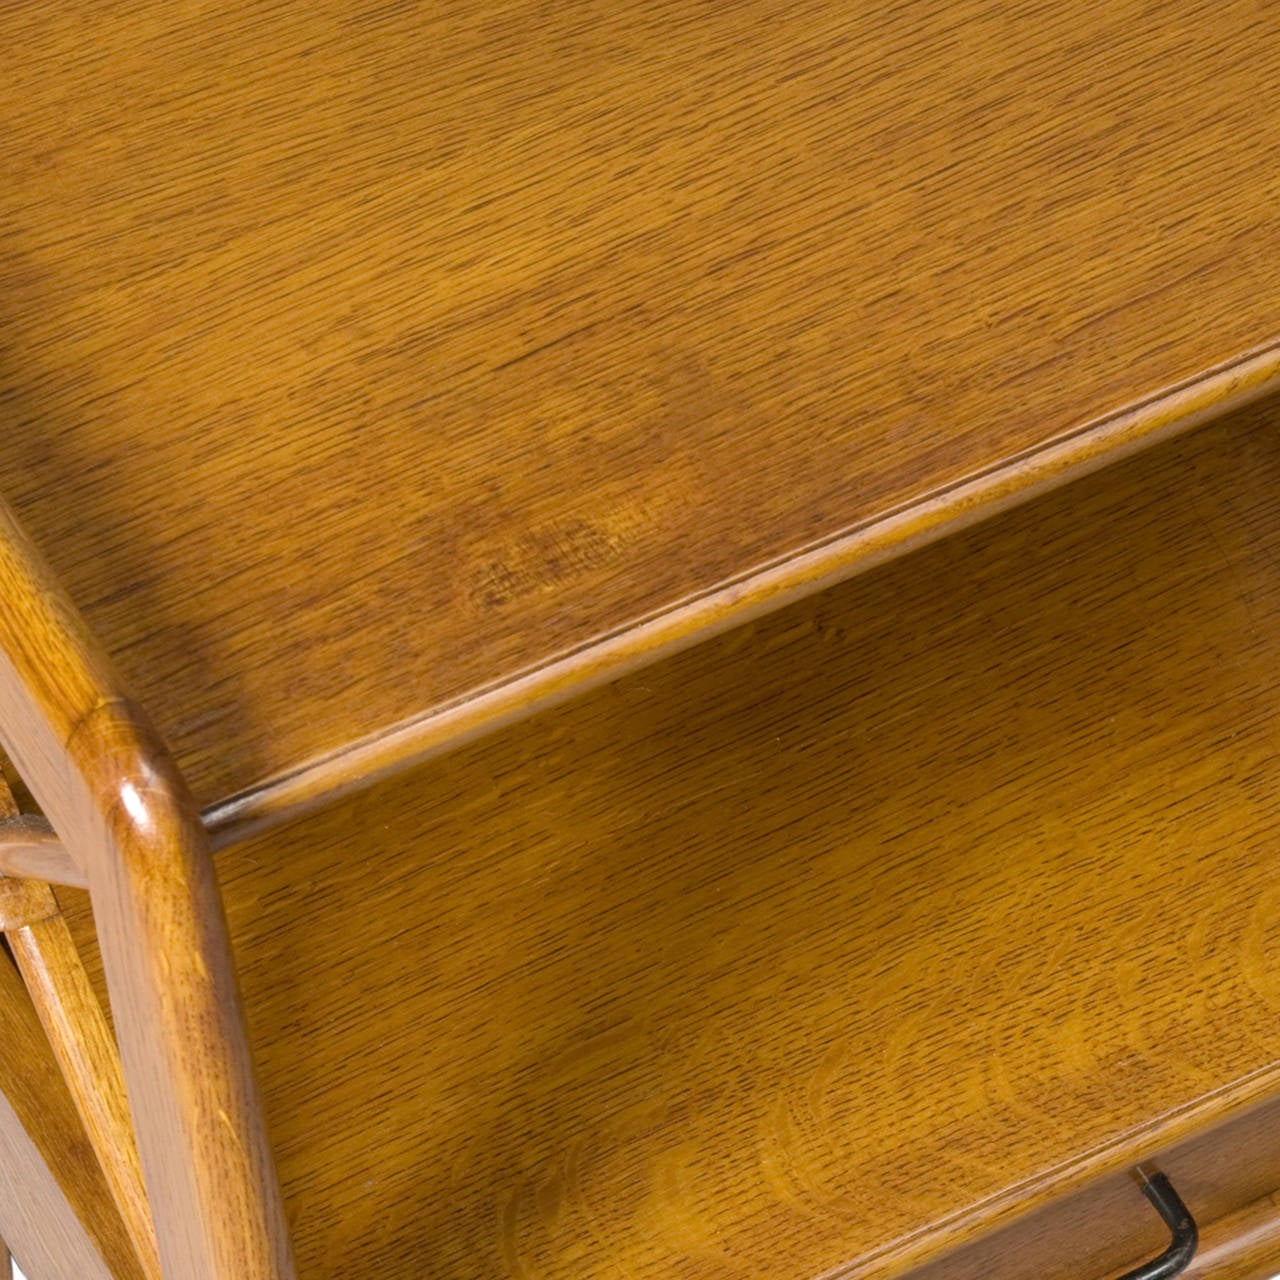 French Oak Bedside Tables In Excellent Condition For Sale In Brooklyn, NY